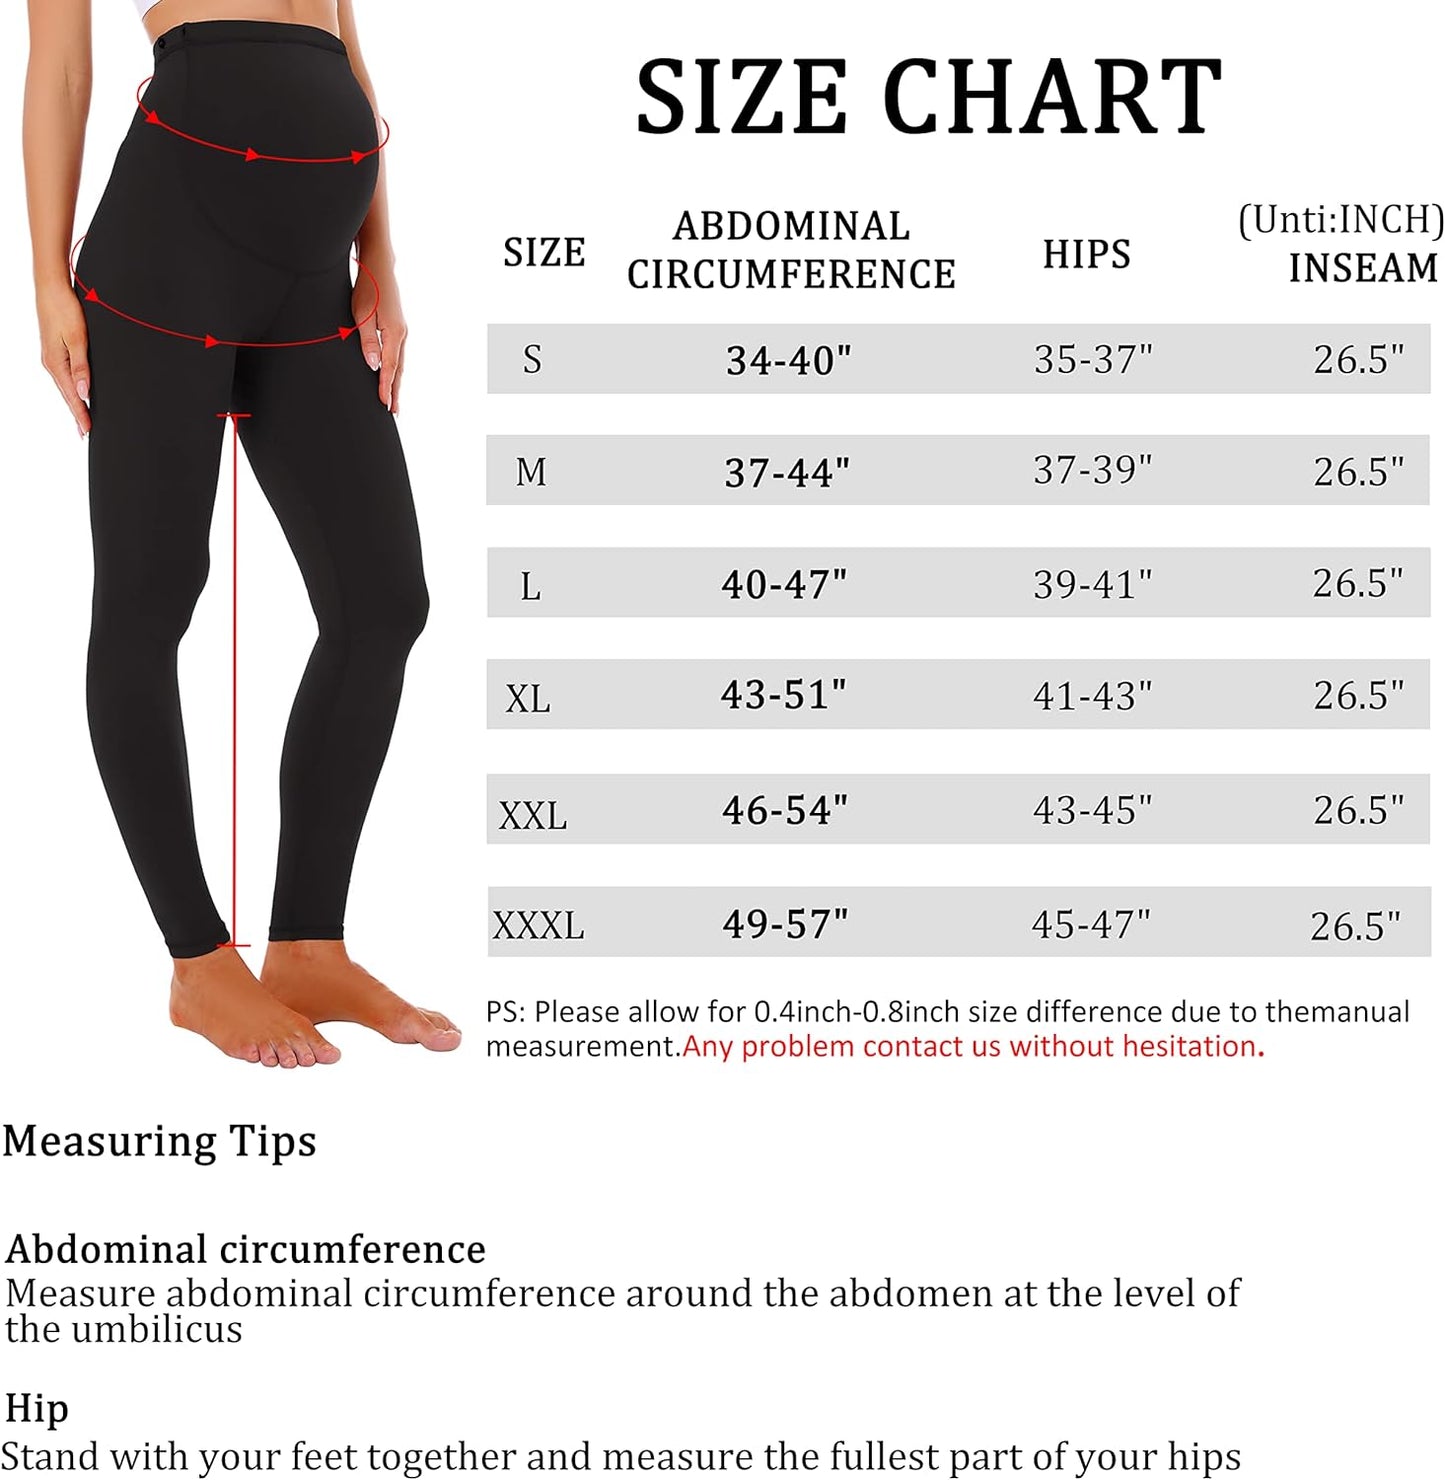 Women'S Maternity Leggings over the Belly Pregnancy Active Workout Yoga Tights Pants